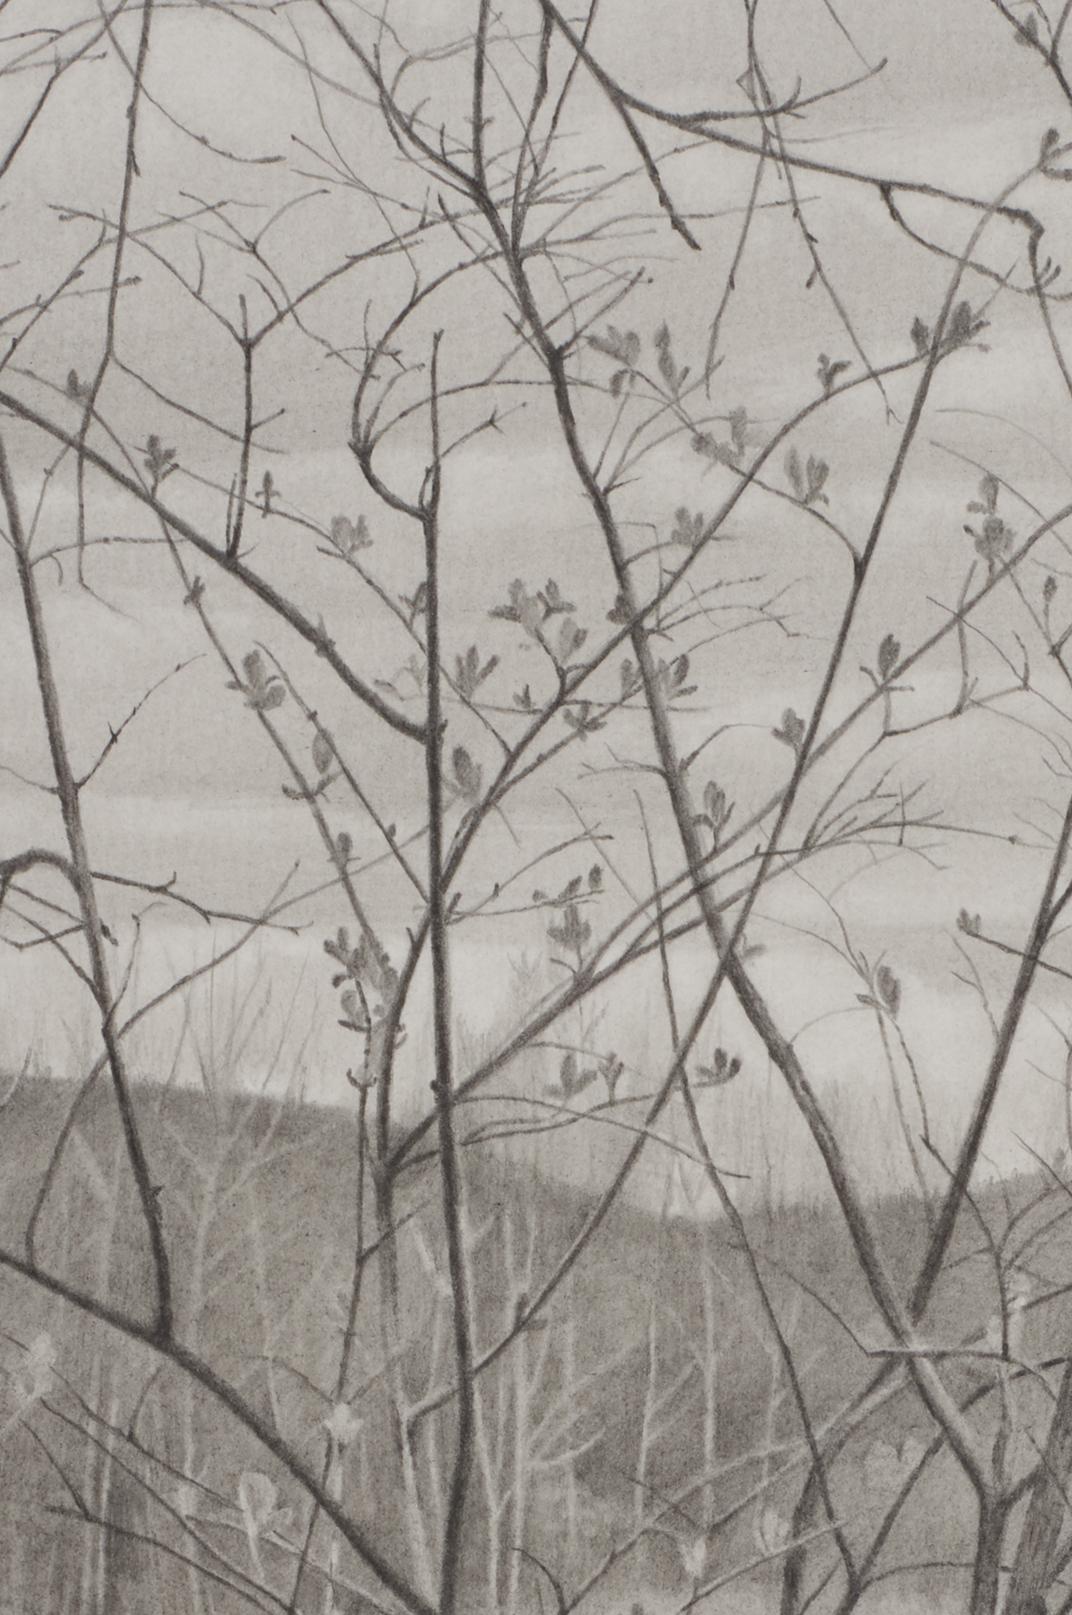 Riverbank 4, photorealist graphite landscape drawing, 2020 - Art by Mary Reilly